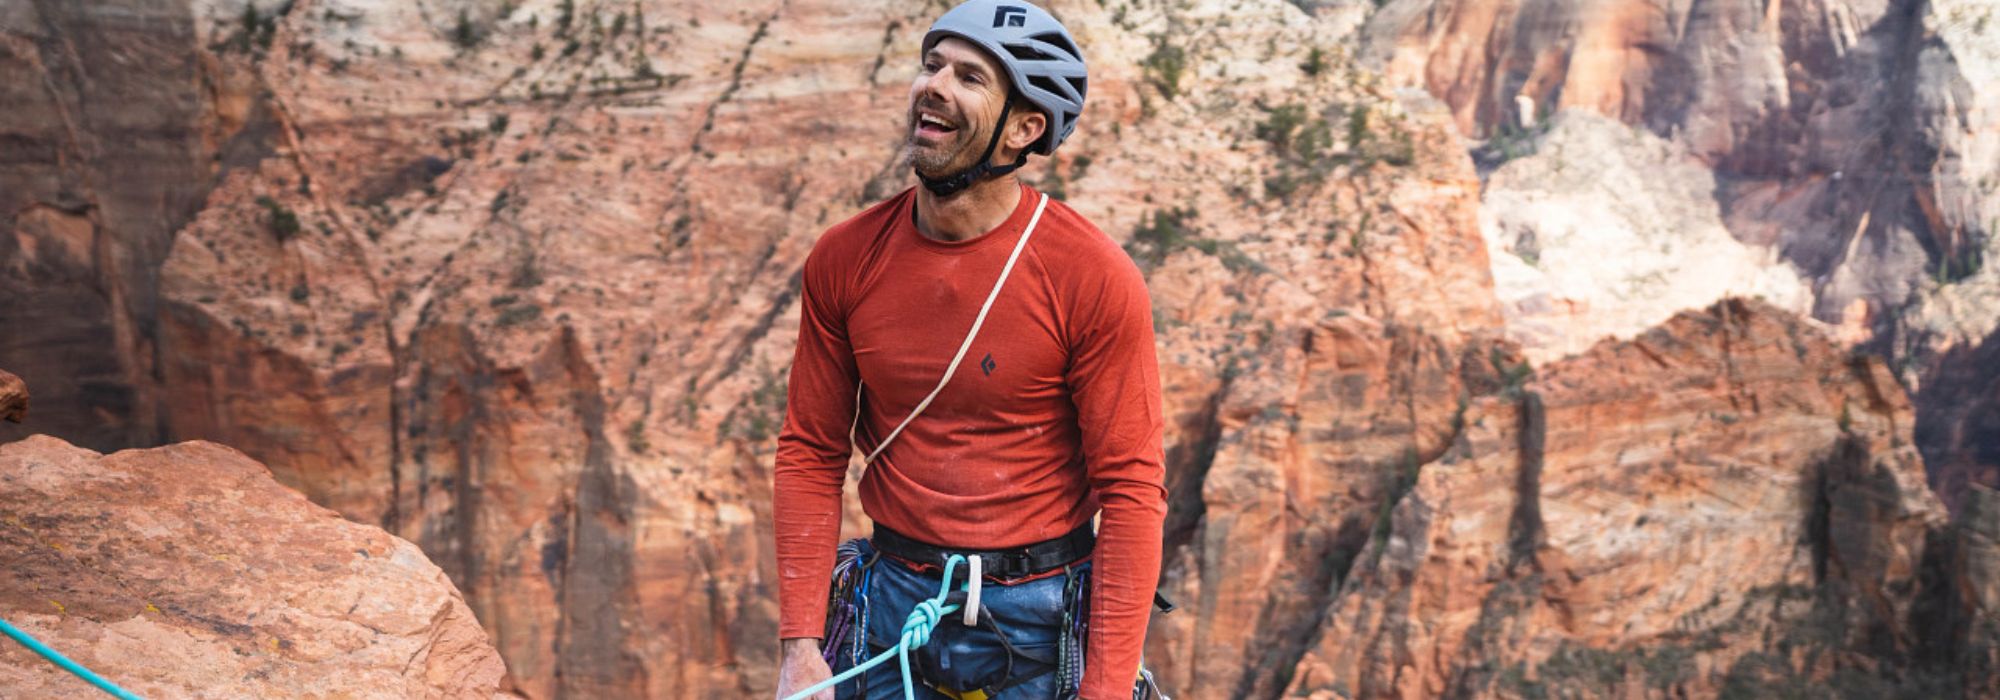 How to Choose a Climbing Harness